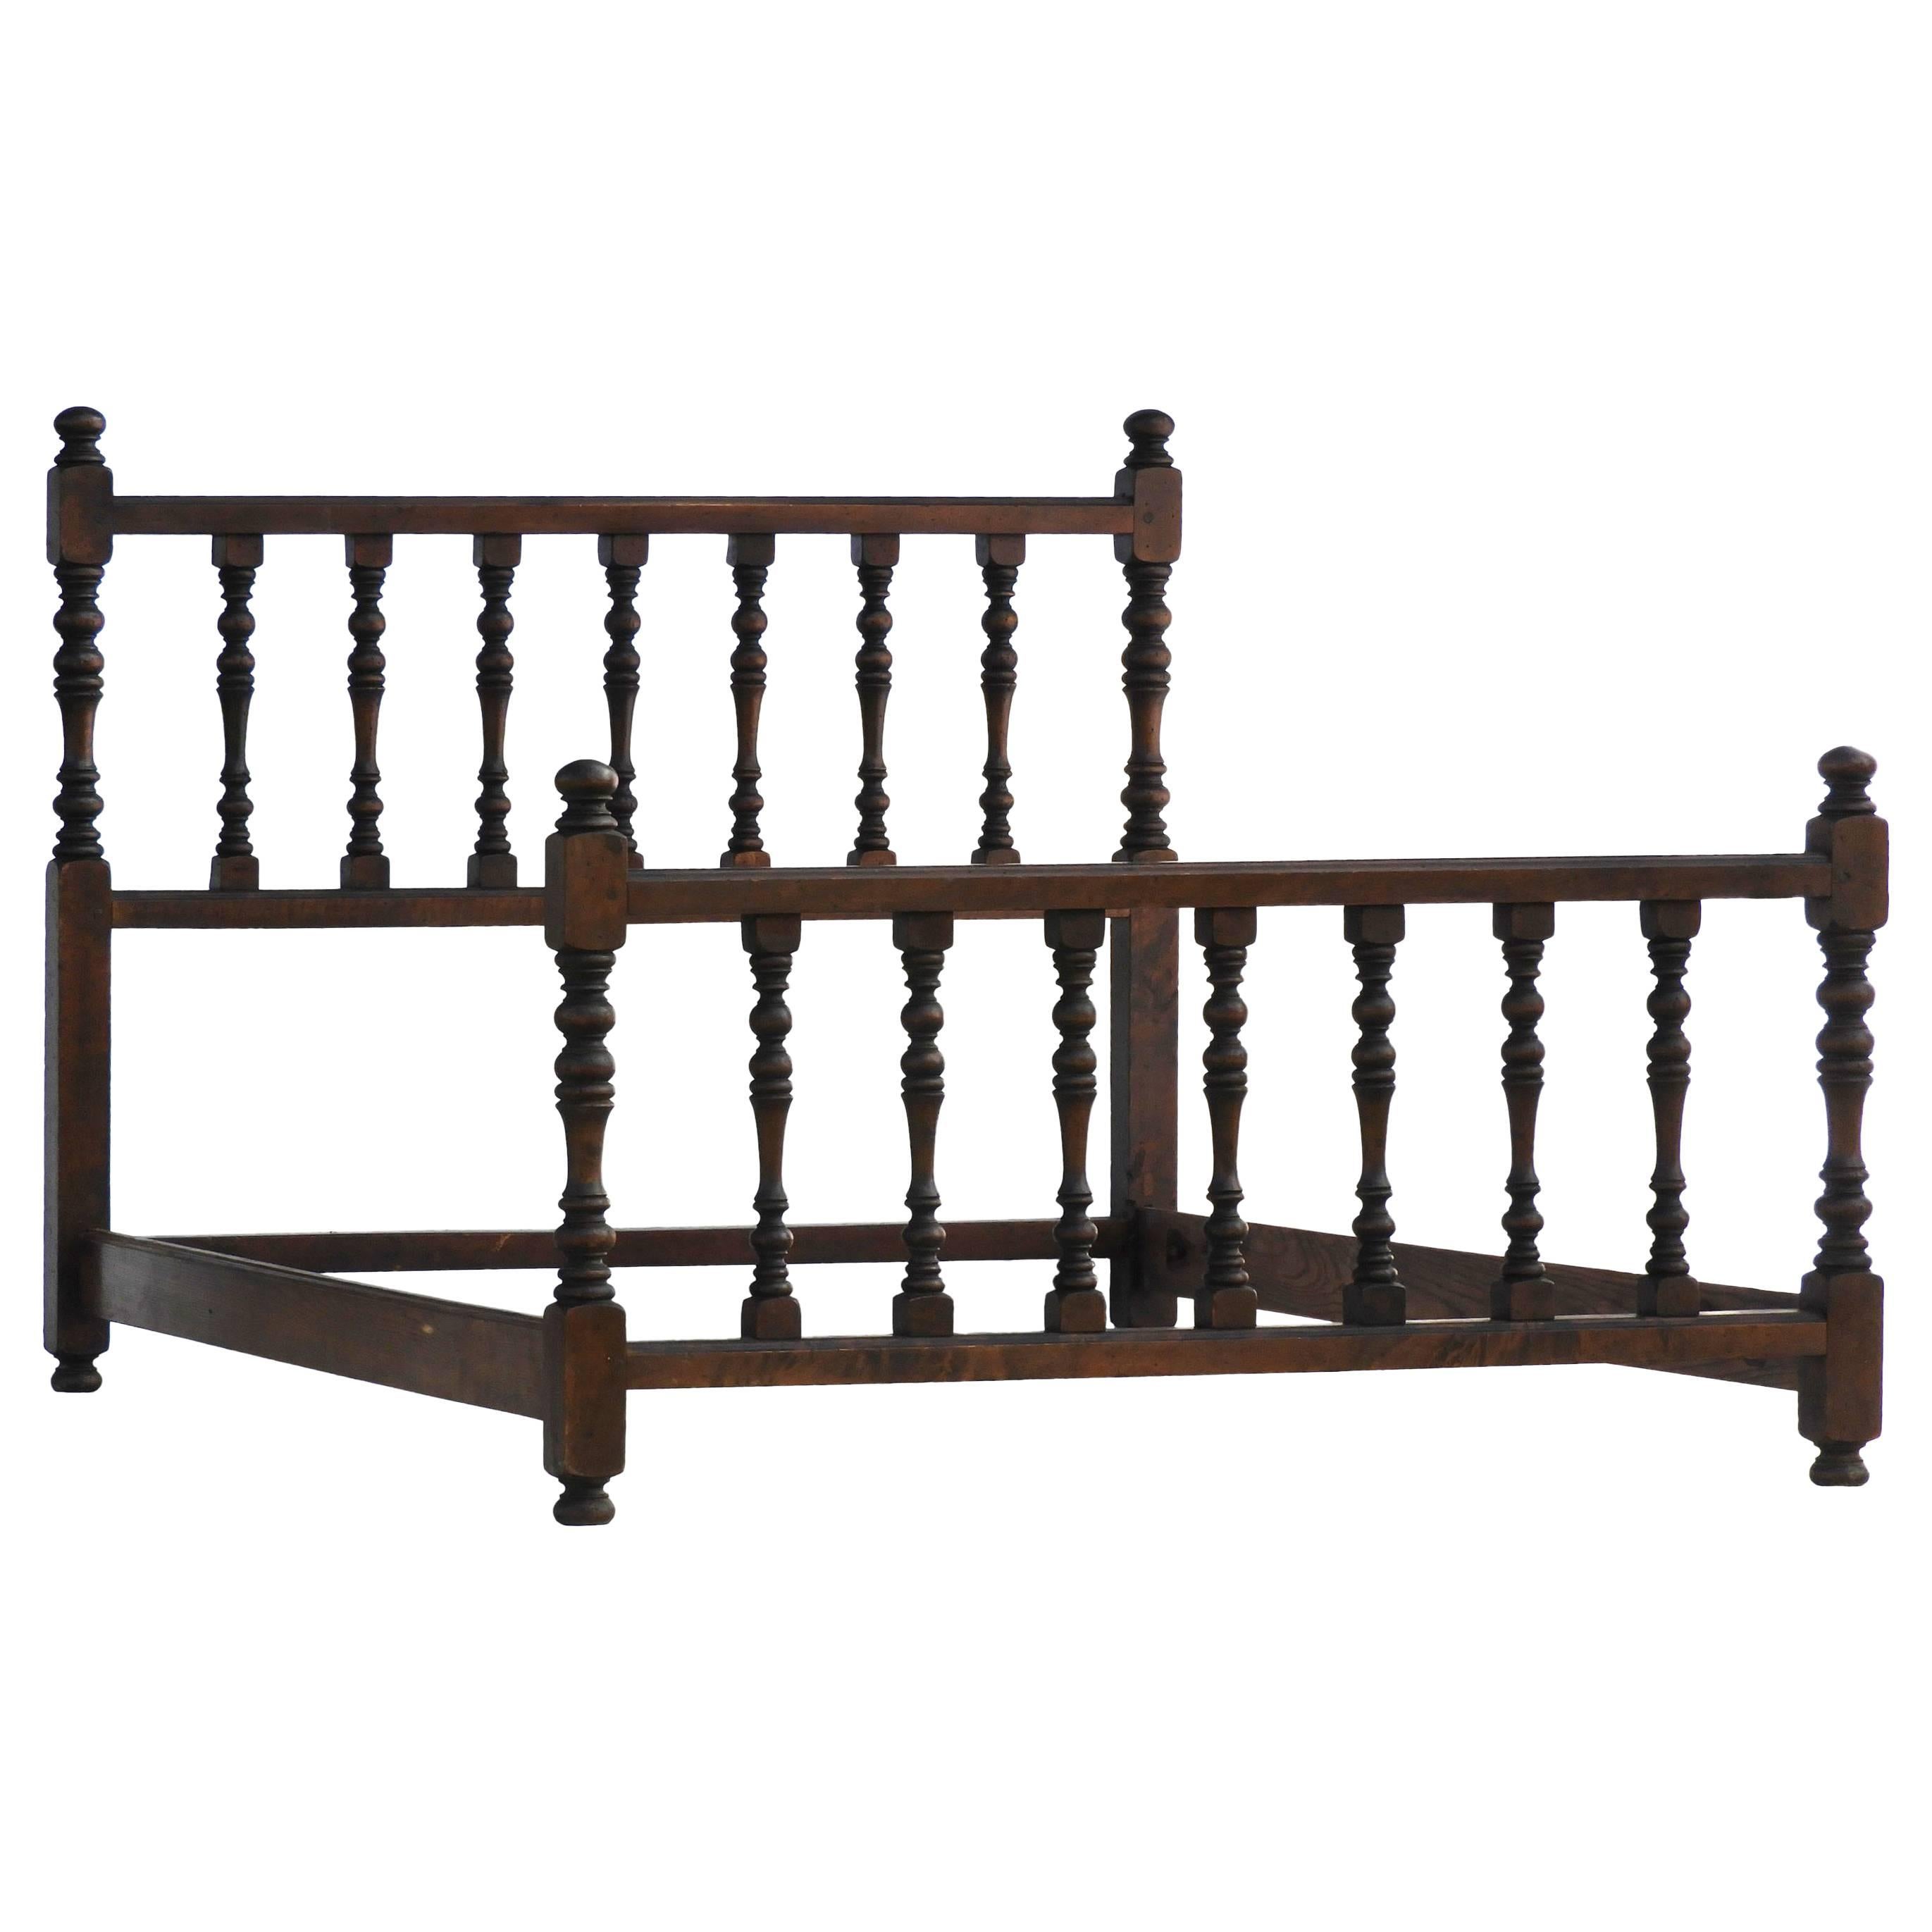 Antique Bed US Queen UK King Size French Provincial, 19th Century